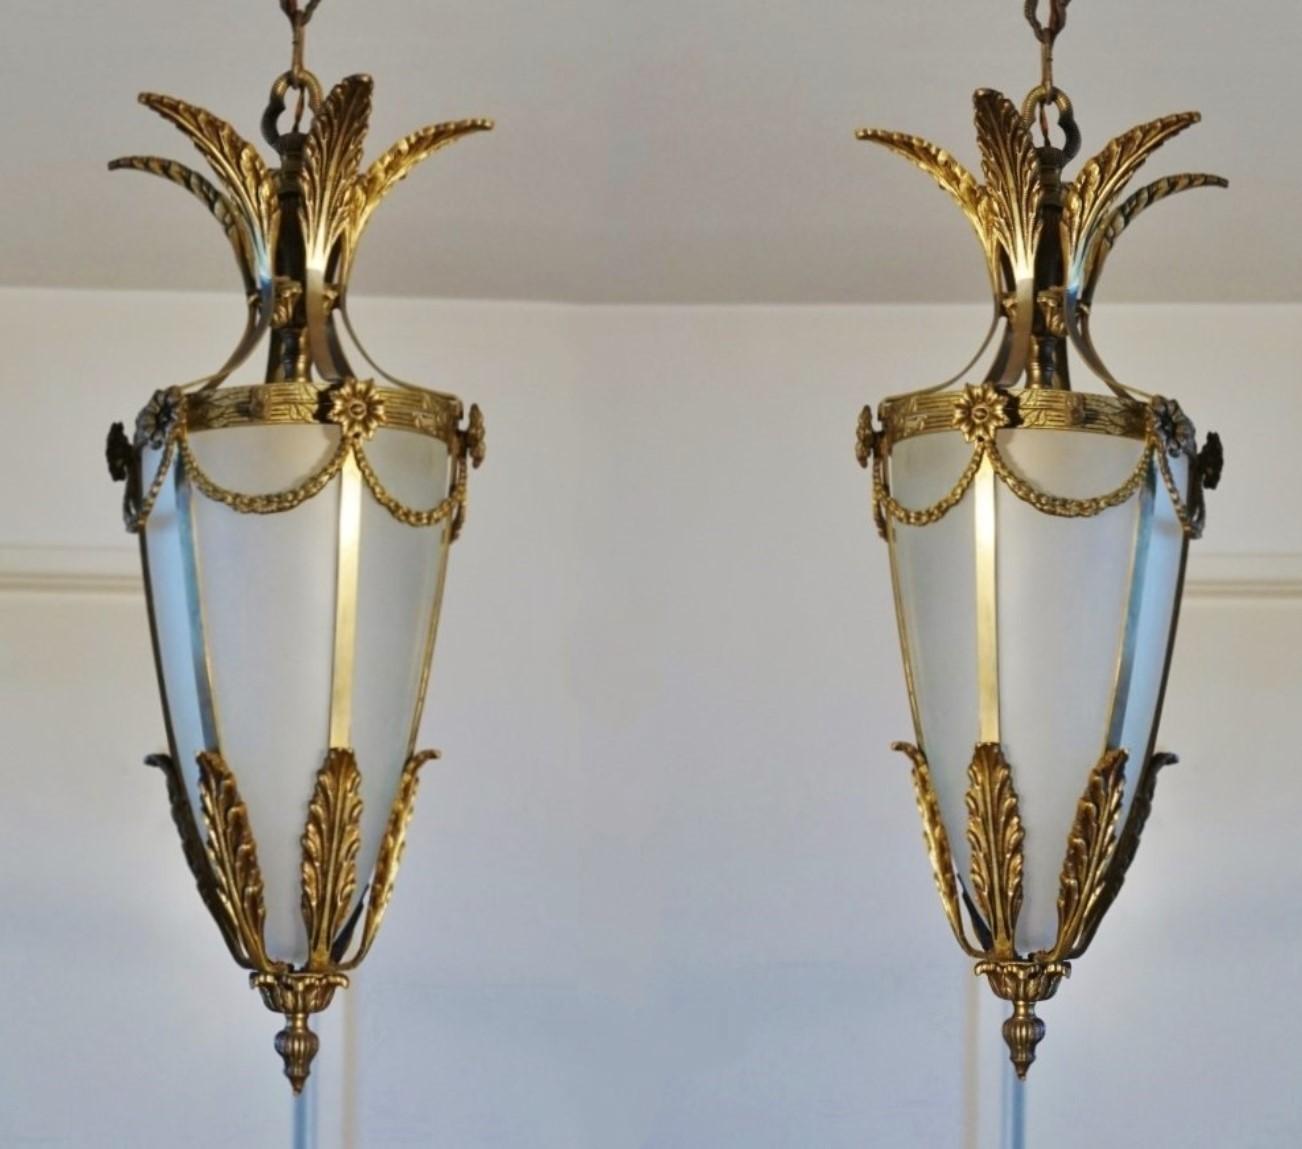 Pair of Art Deco lanterns, Italy, 1930s. Solid bronze and parcel brass with cone-shaped frosted glass shade.
Each lantern: One E27 brass and porcelain light socket for a large sized bulb up to 60W-100W.
Dimensions:
Total height with chain 41